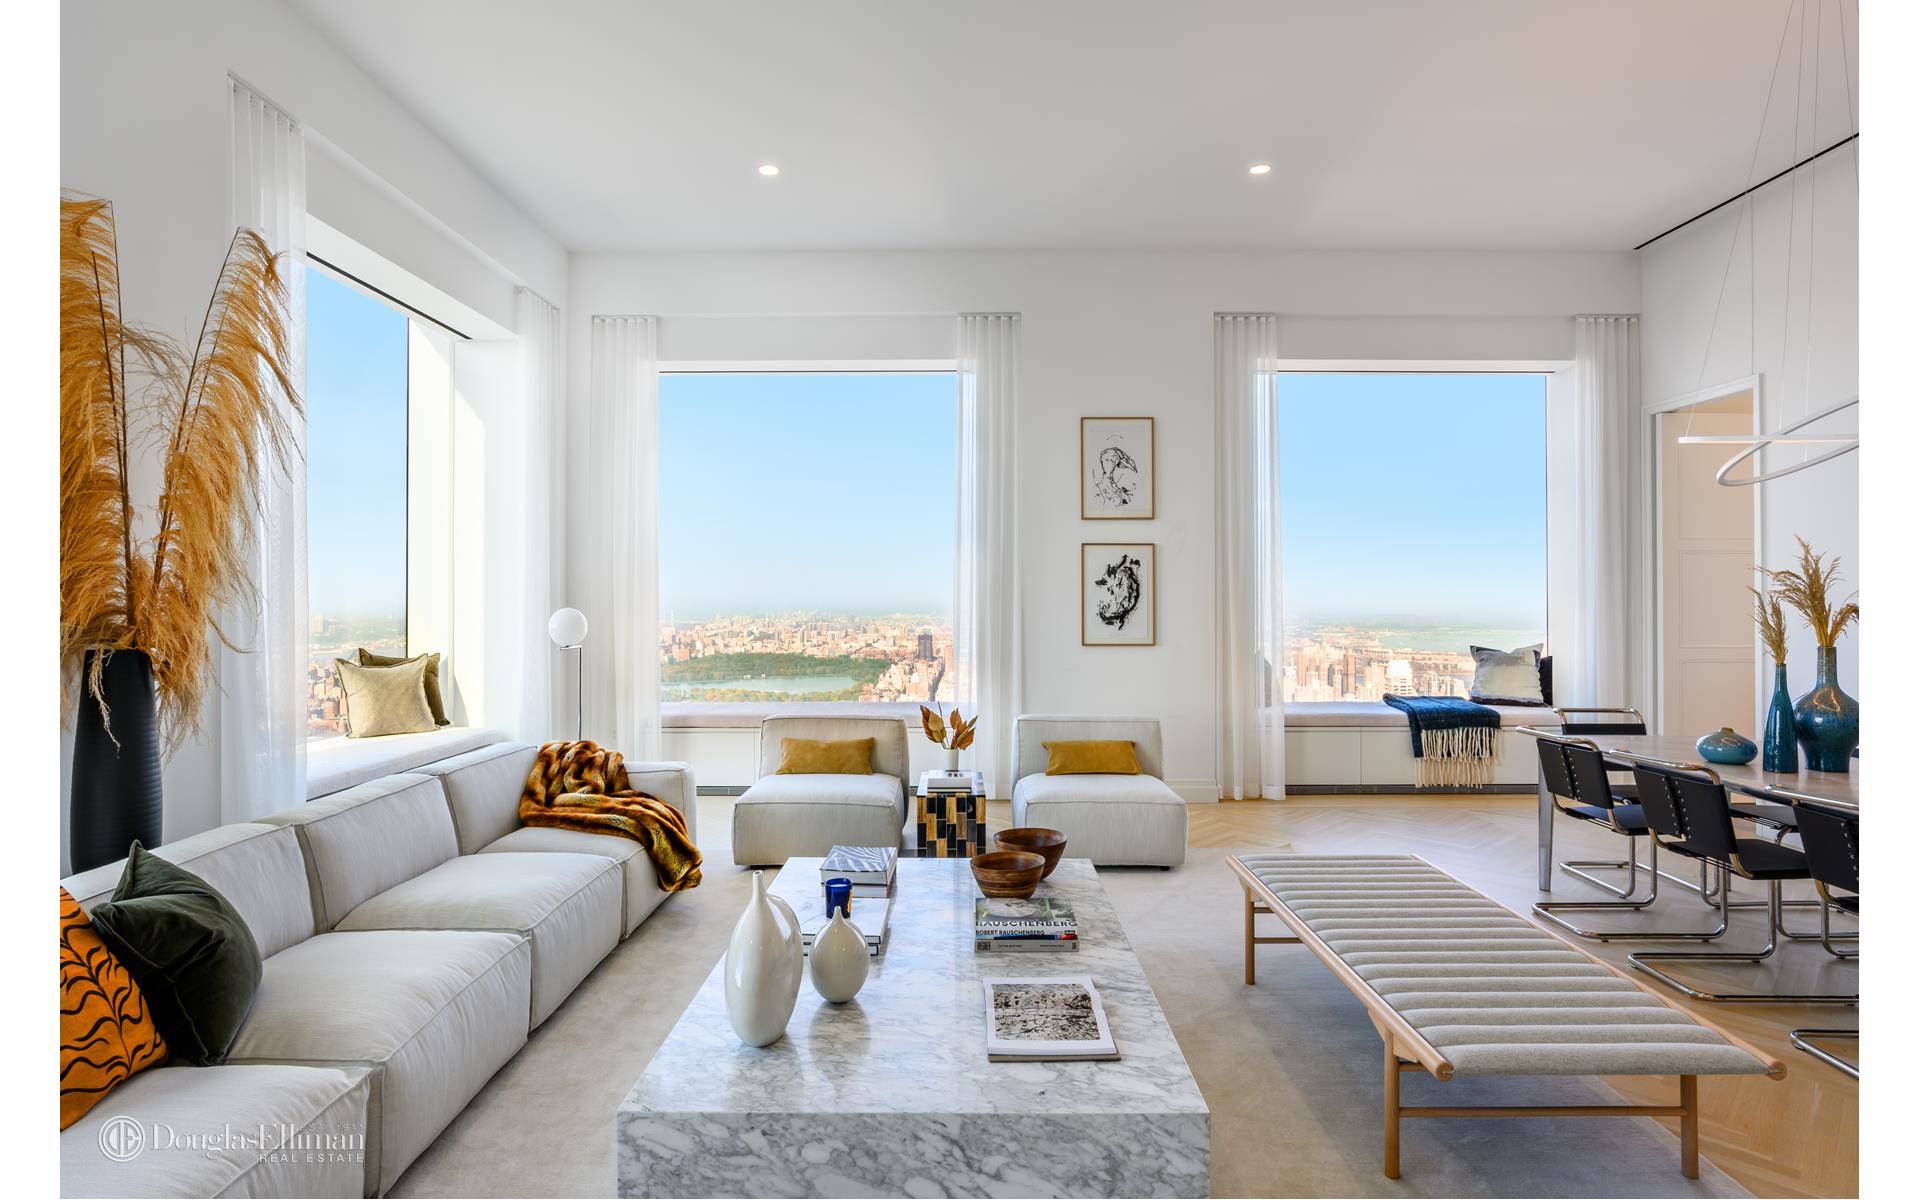 The Residence The Only B Line Available For Sale at 432 Park AvenueOccupying the entire western half of the 66th floor, this 4, 019 square foot residence at the iconic ...